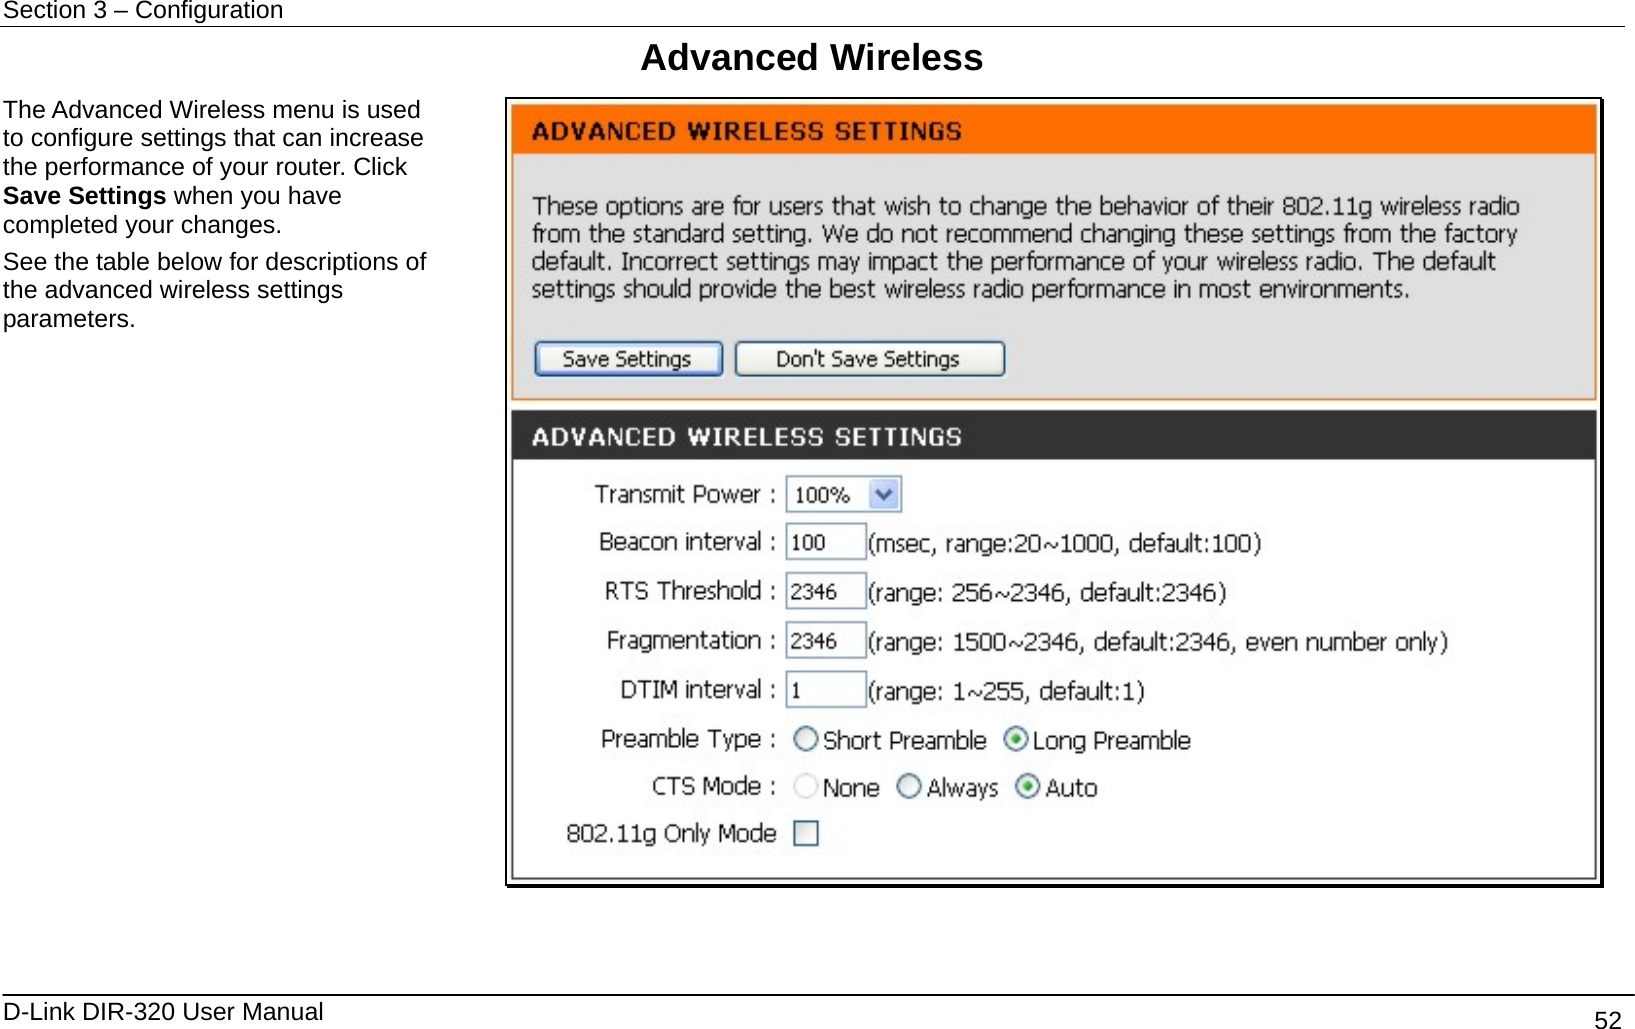 Section 3 – Configuration   D-Link DIR-320 User Manual                                       52 Advanced Wireless The Advanced Wireless menu is used to configure settings that can increase the performance of your router. Click Save Settings when you have completed your changes. See the table below for descriptions of the advanced wireless settings parameters.    